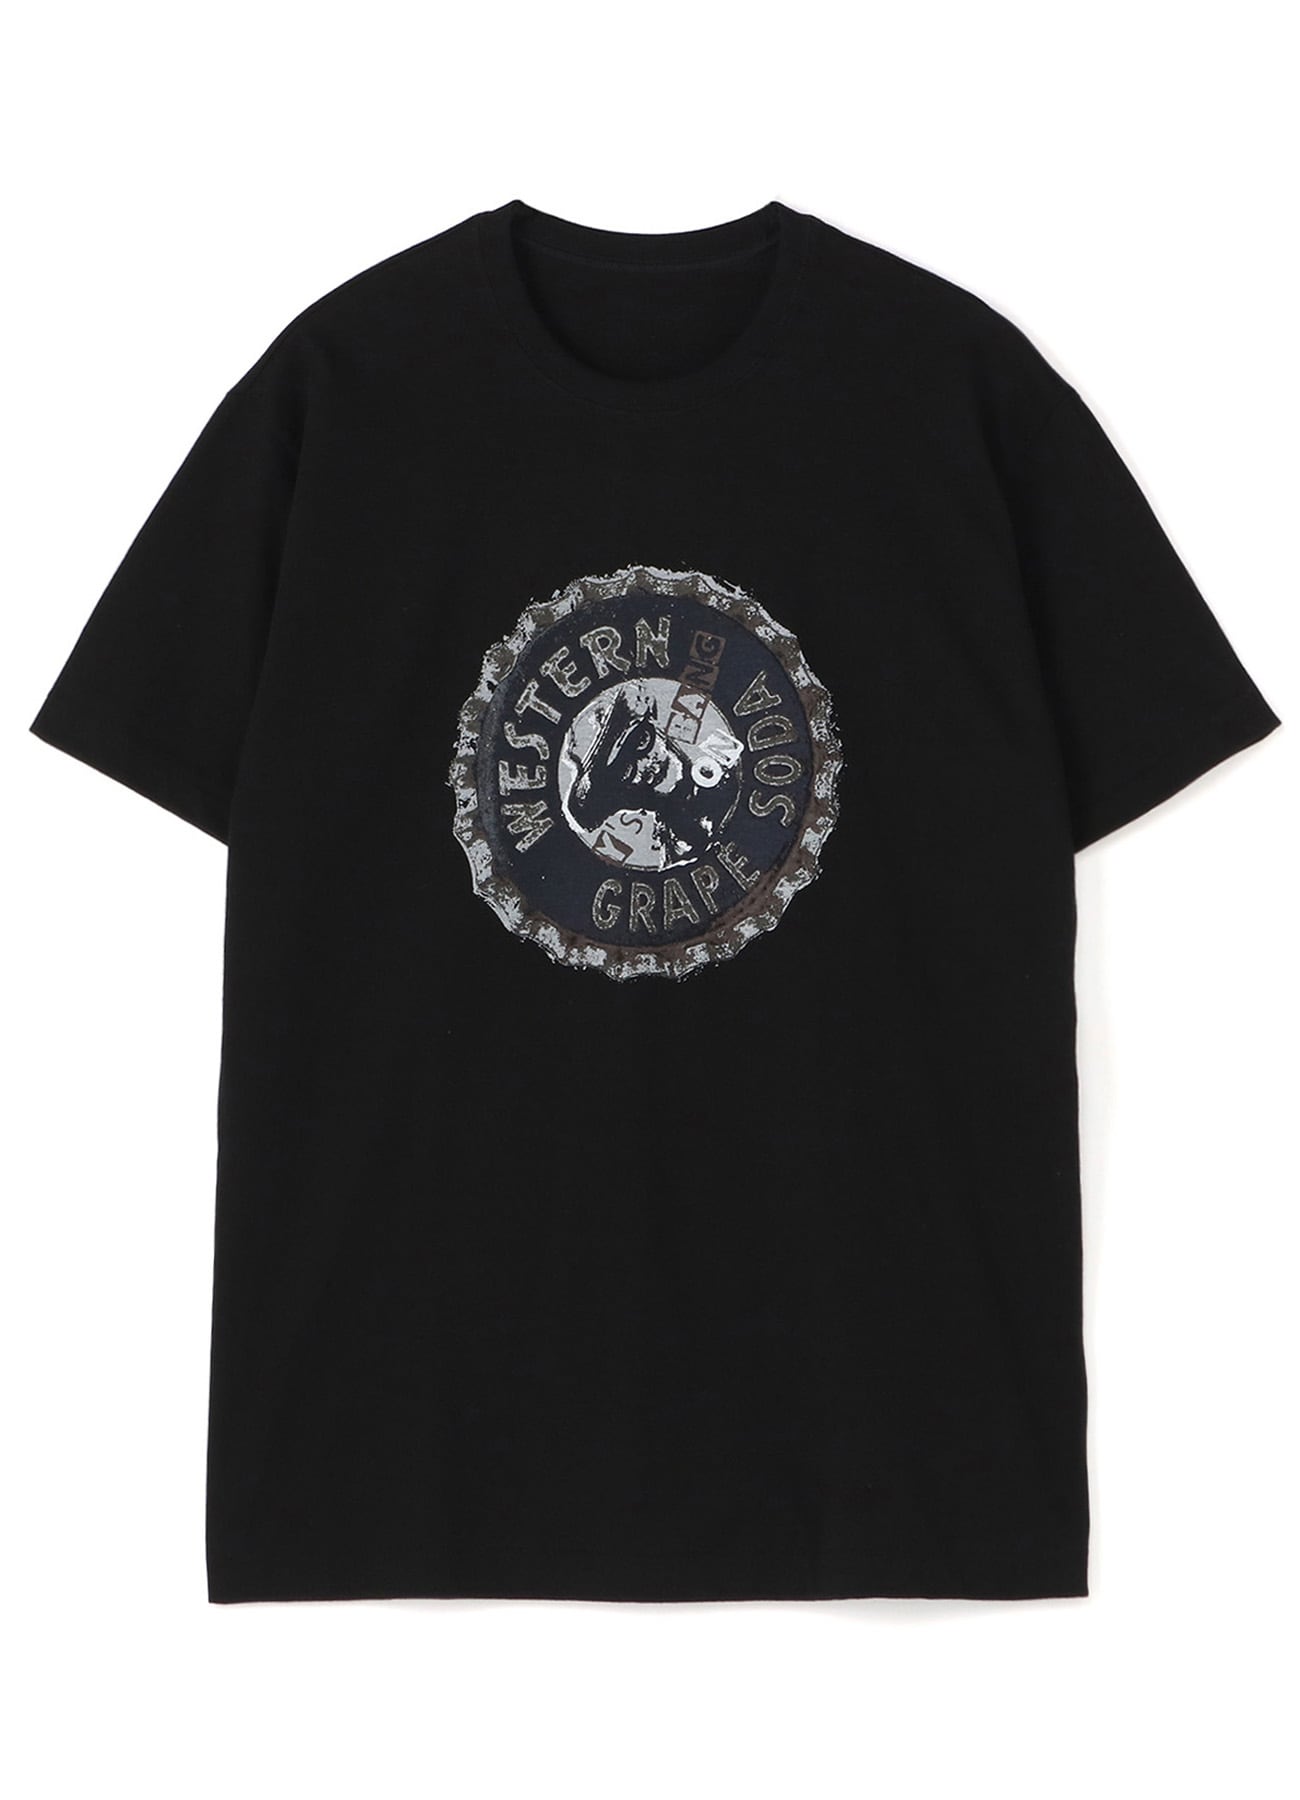 Y's BANG ON! CROWN T-SHIRT WESTERN